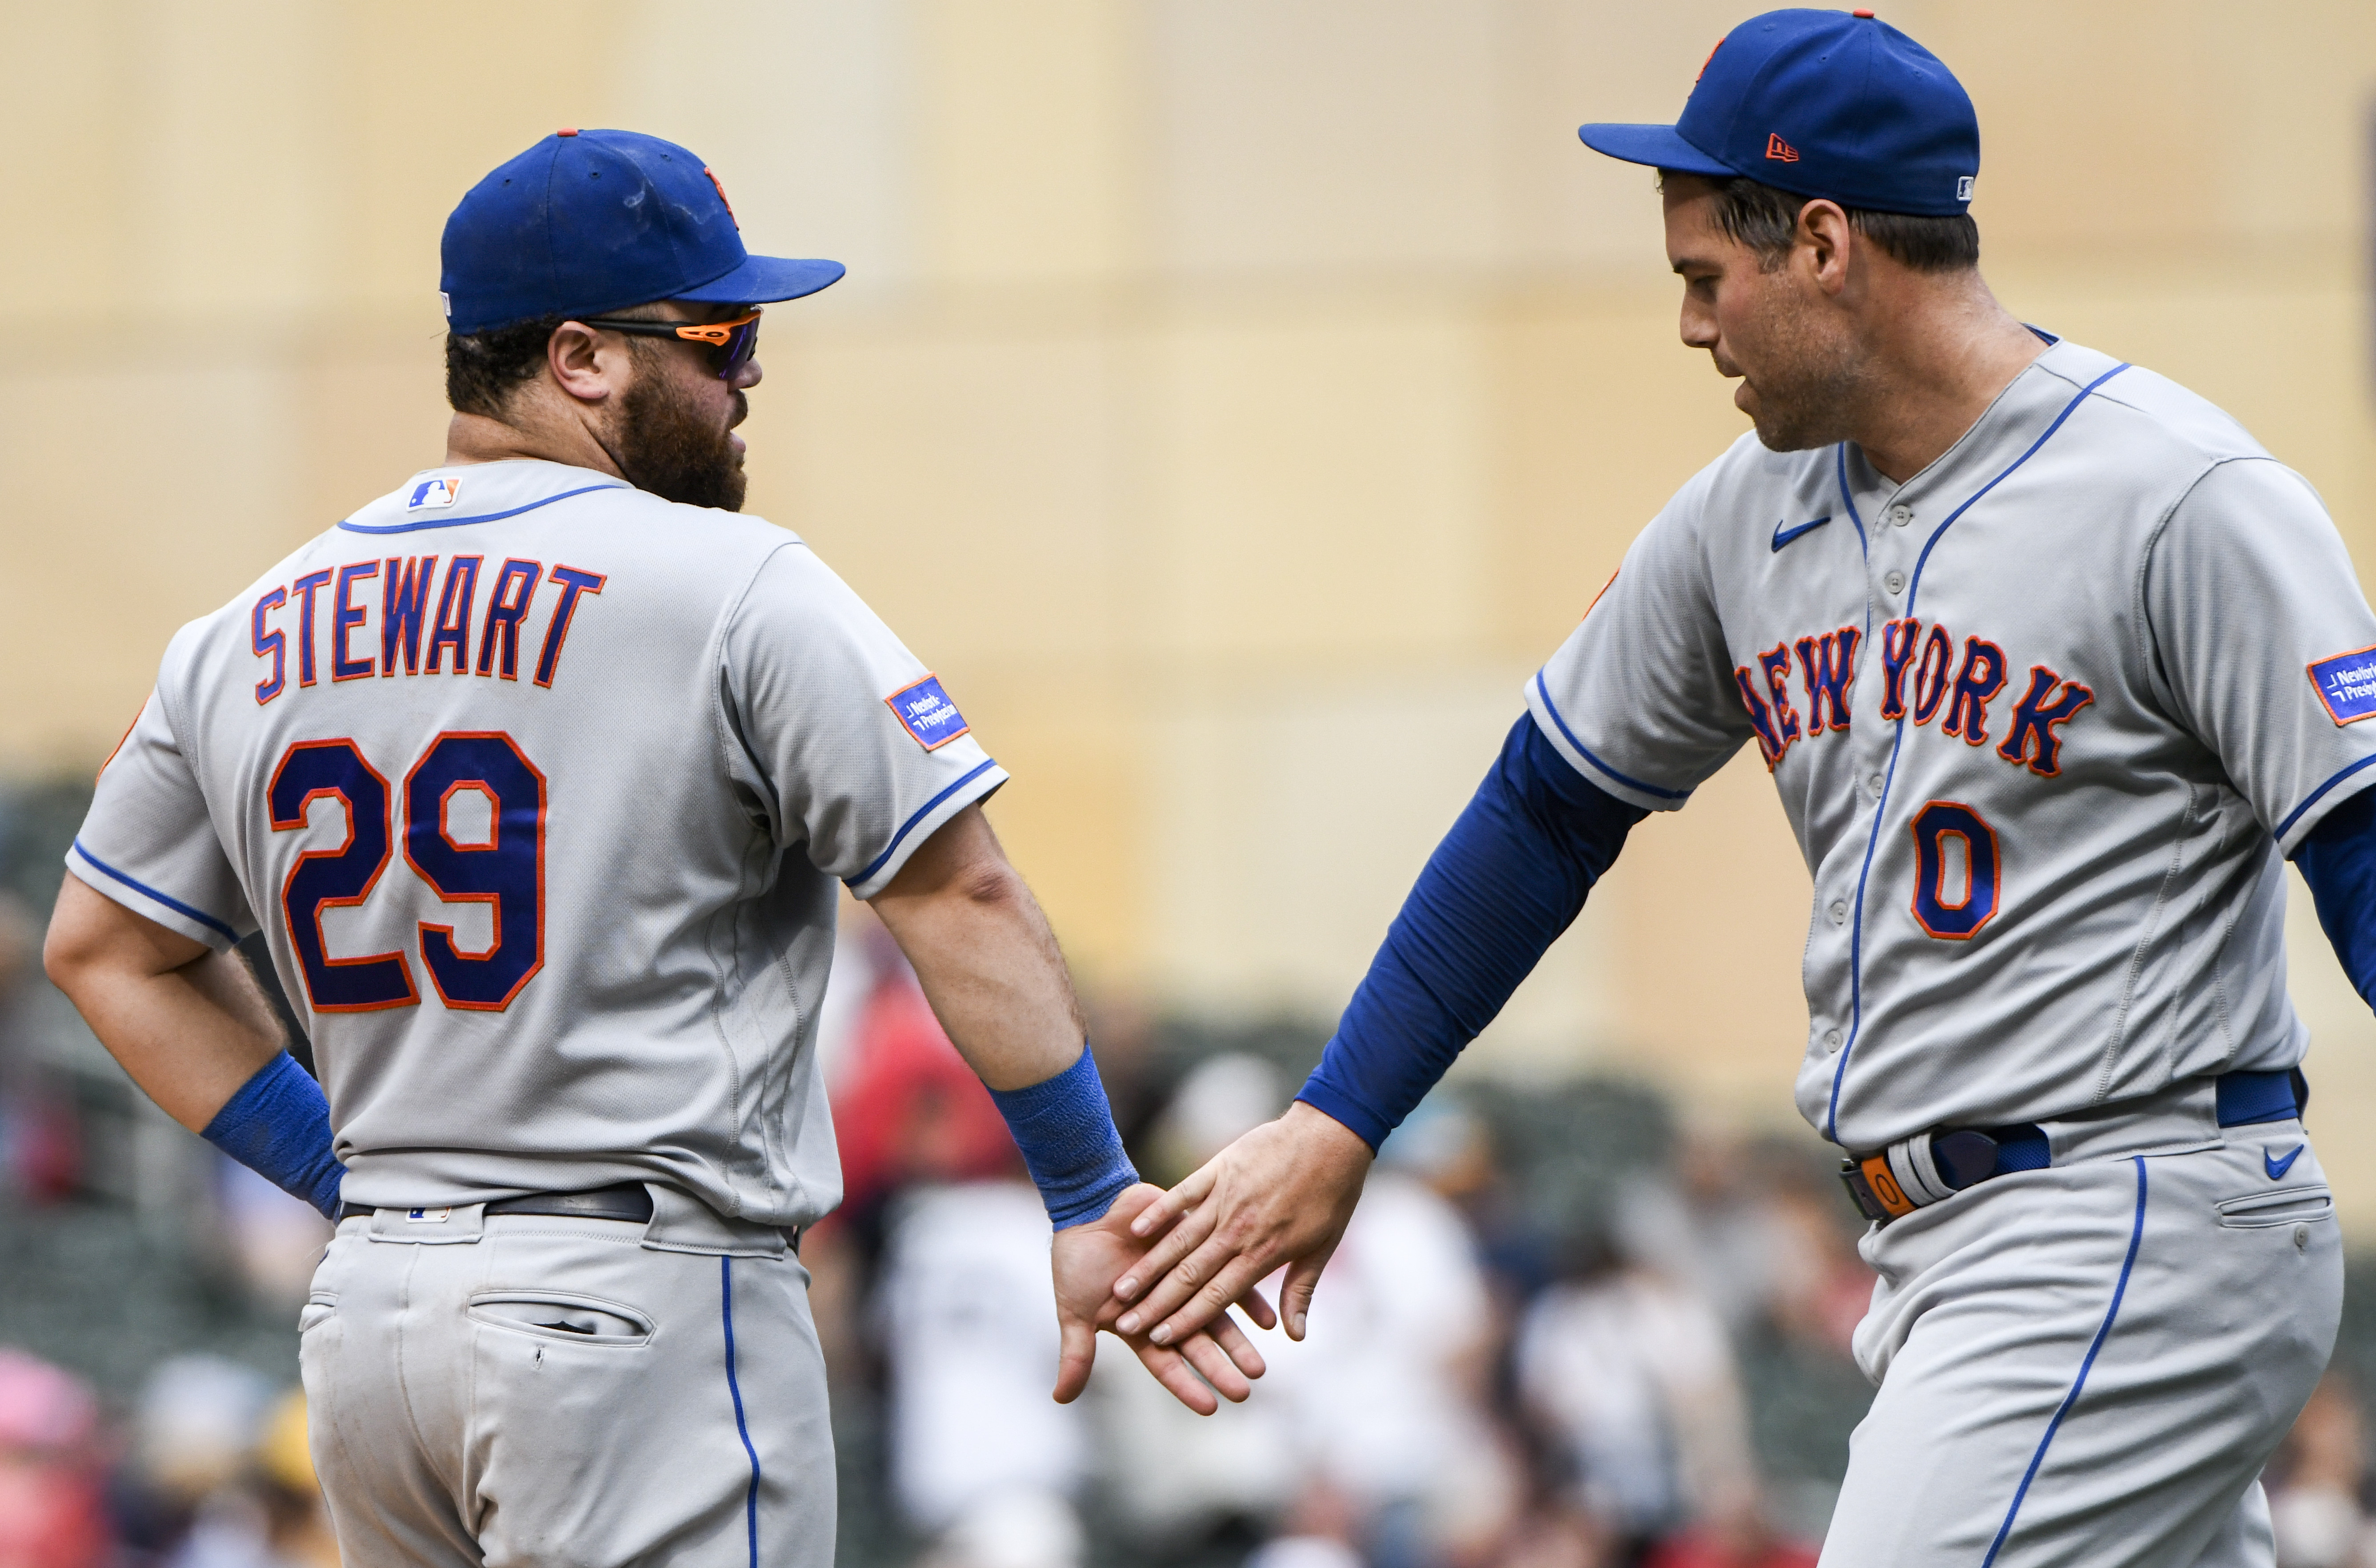 Mets ace Scherzer suffers hammy injury, day after deGrom out